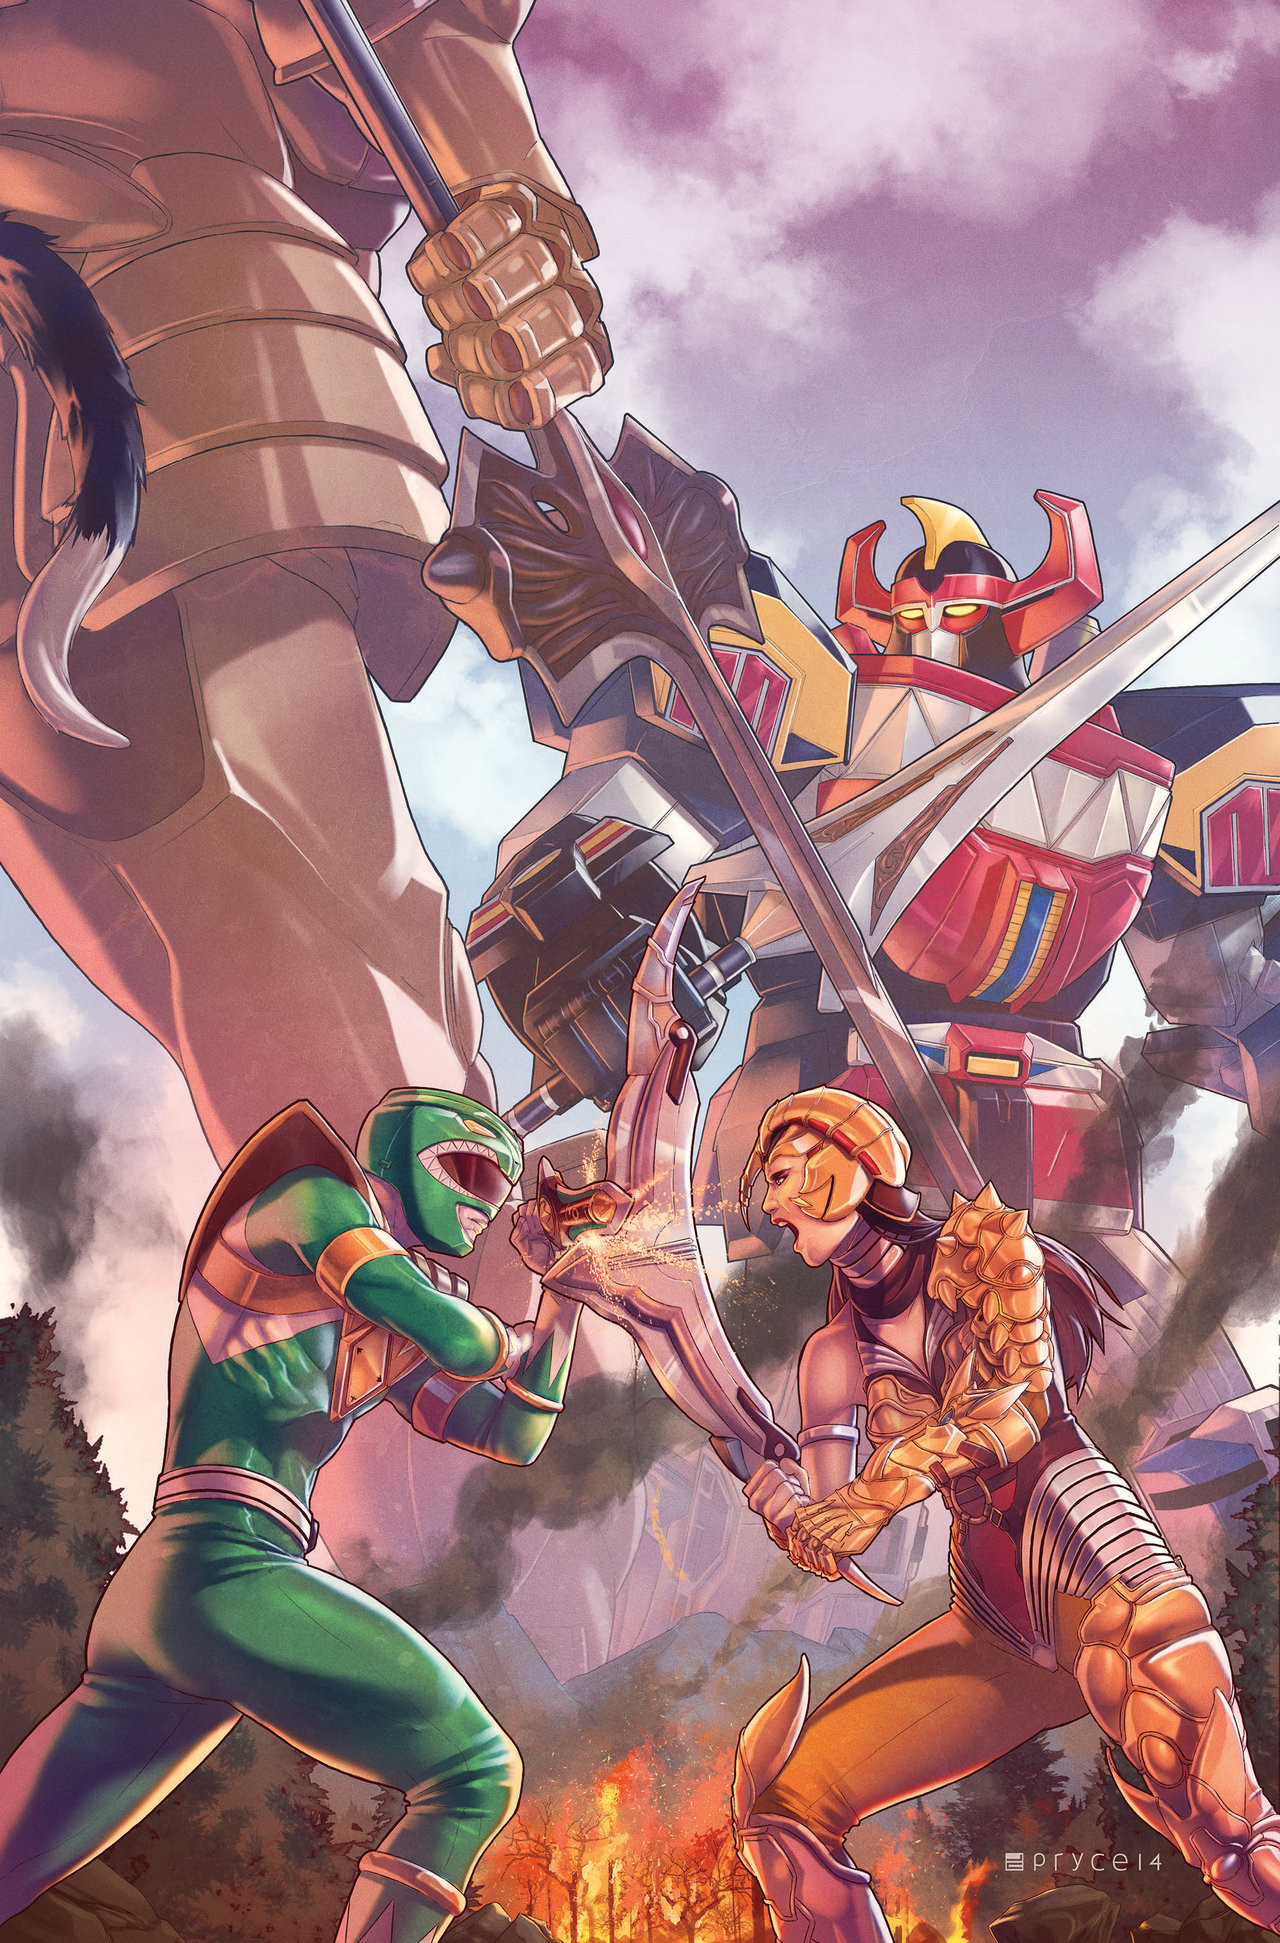 1280x1943 ... Mighty Morphin Power Rangers #2 by Pryce14